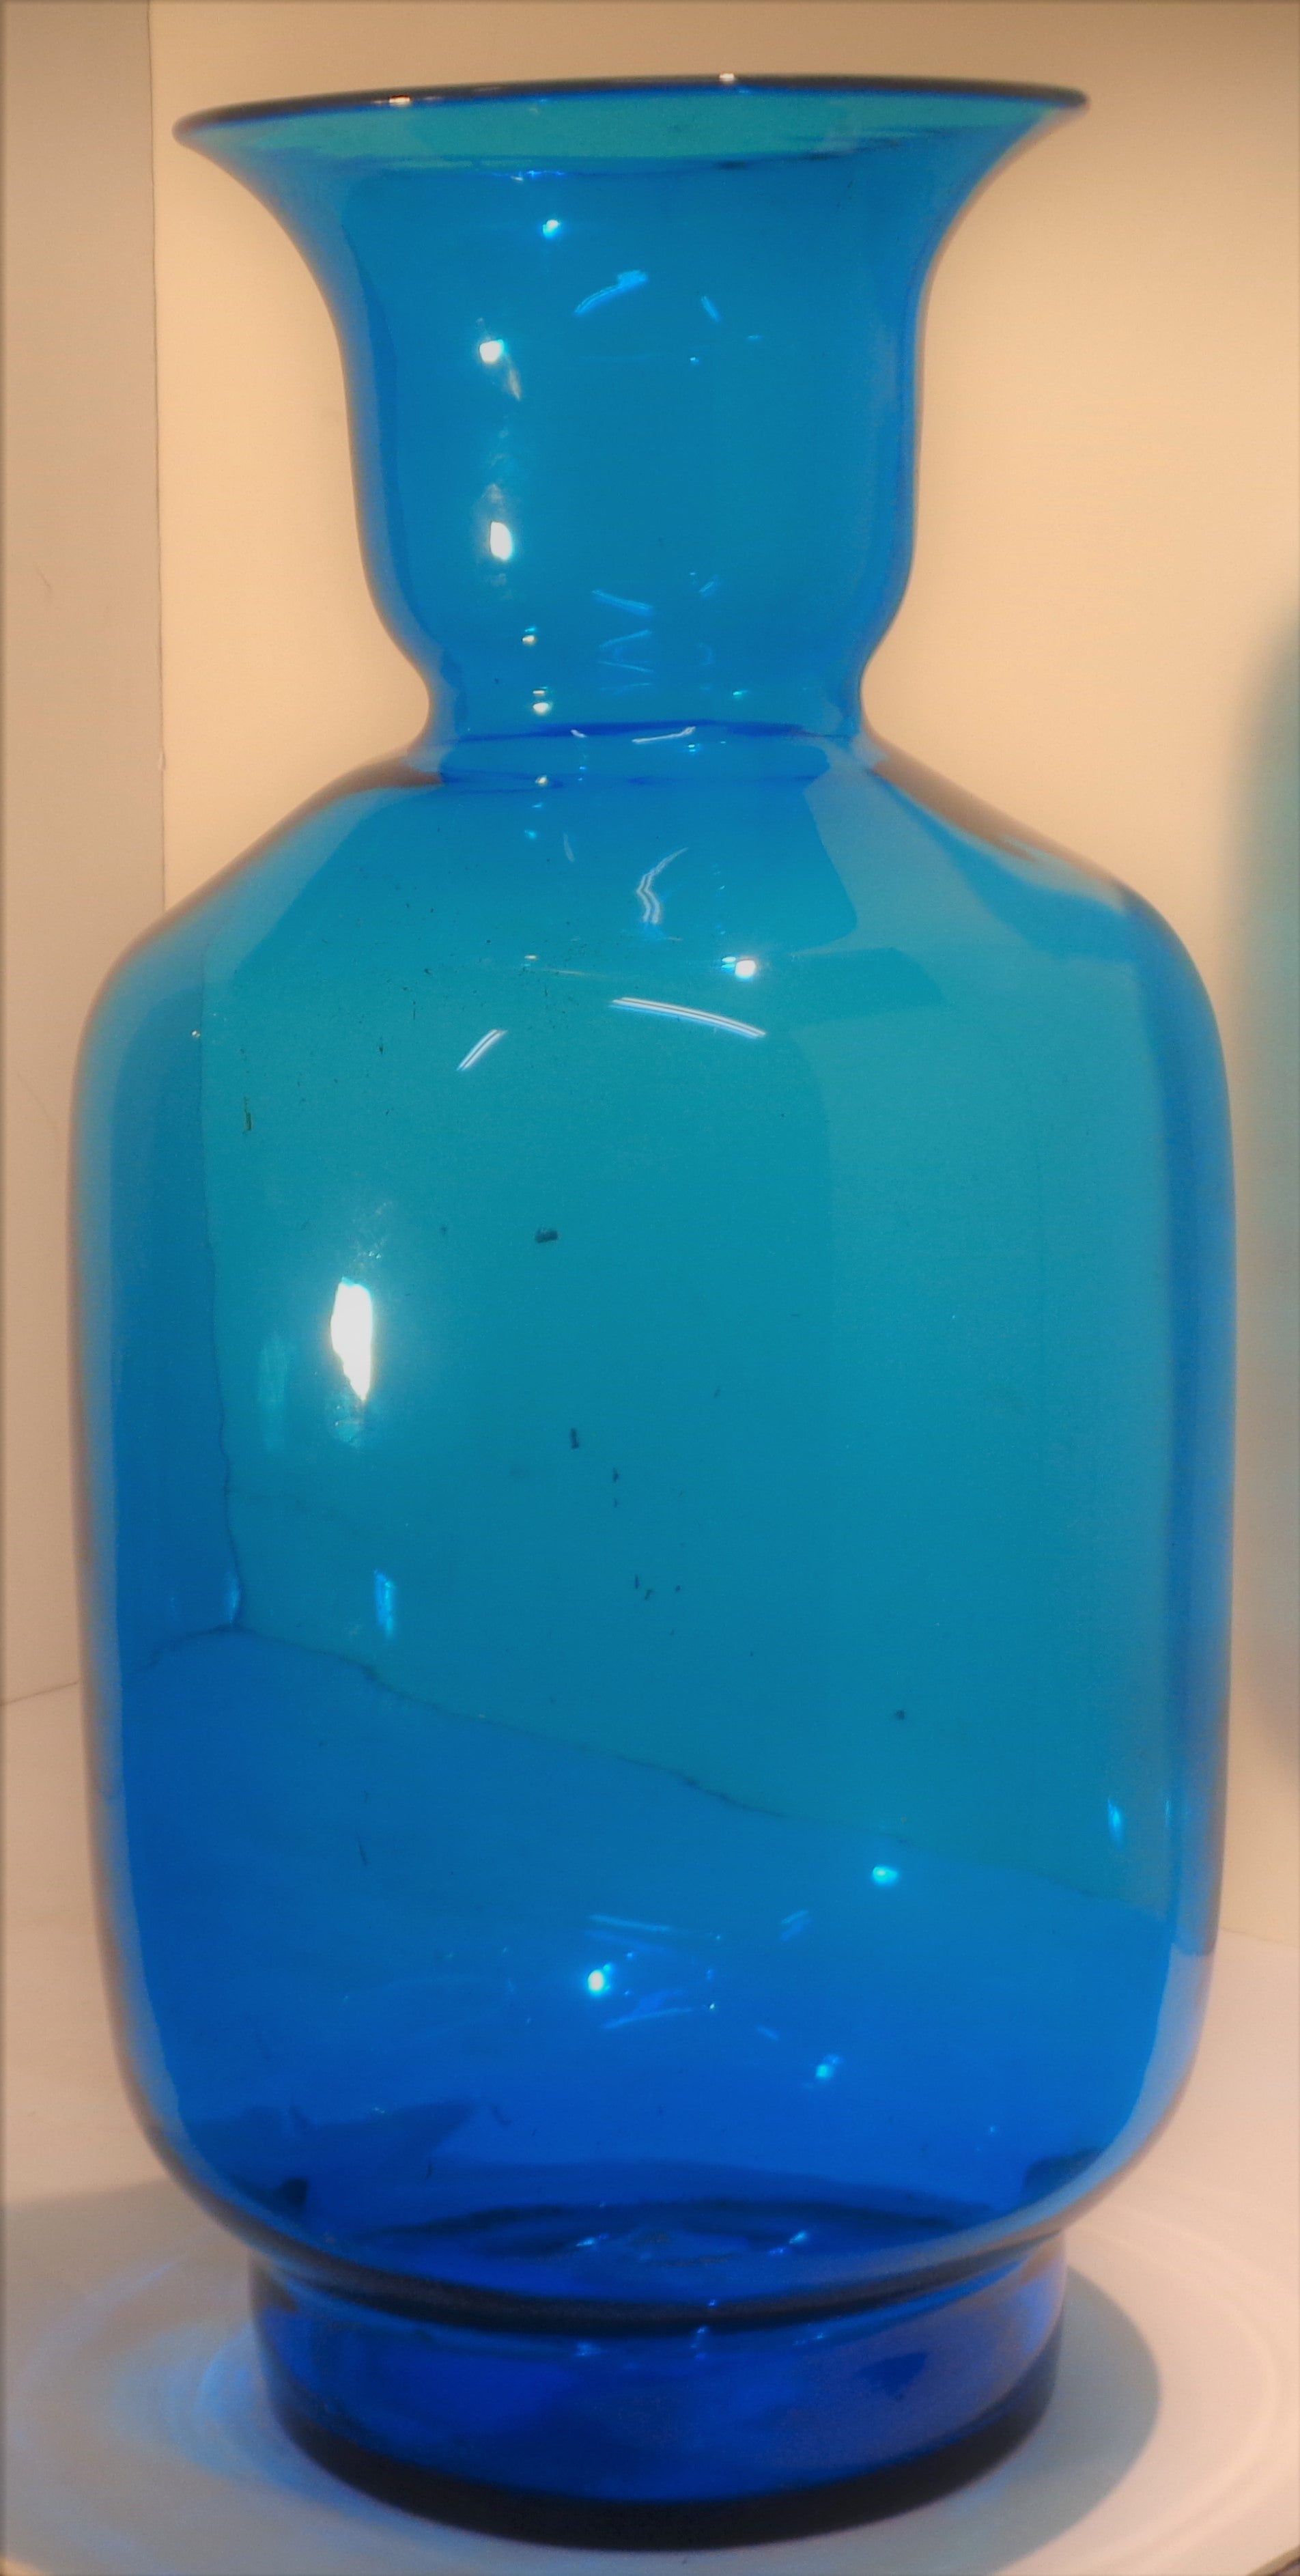 Large scale Blenko blown glass vase w/ beautiful blue color and great sculptural form. Circa 1960's.
Measures - 20 1/4